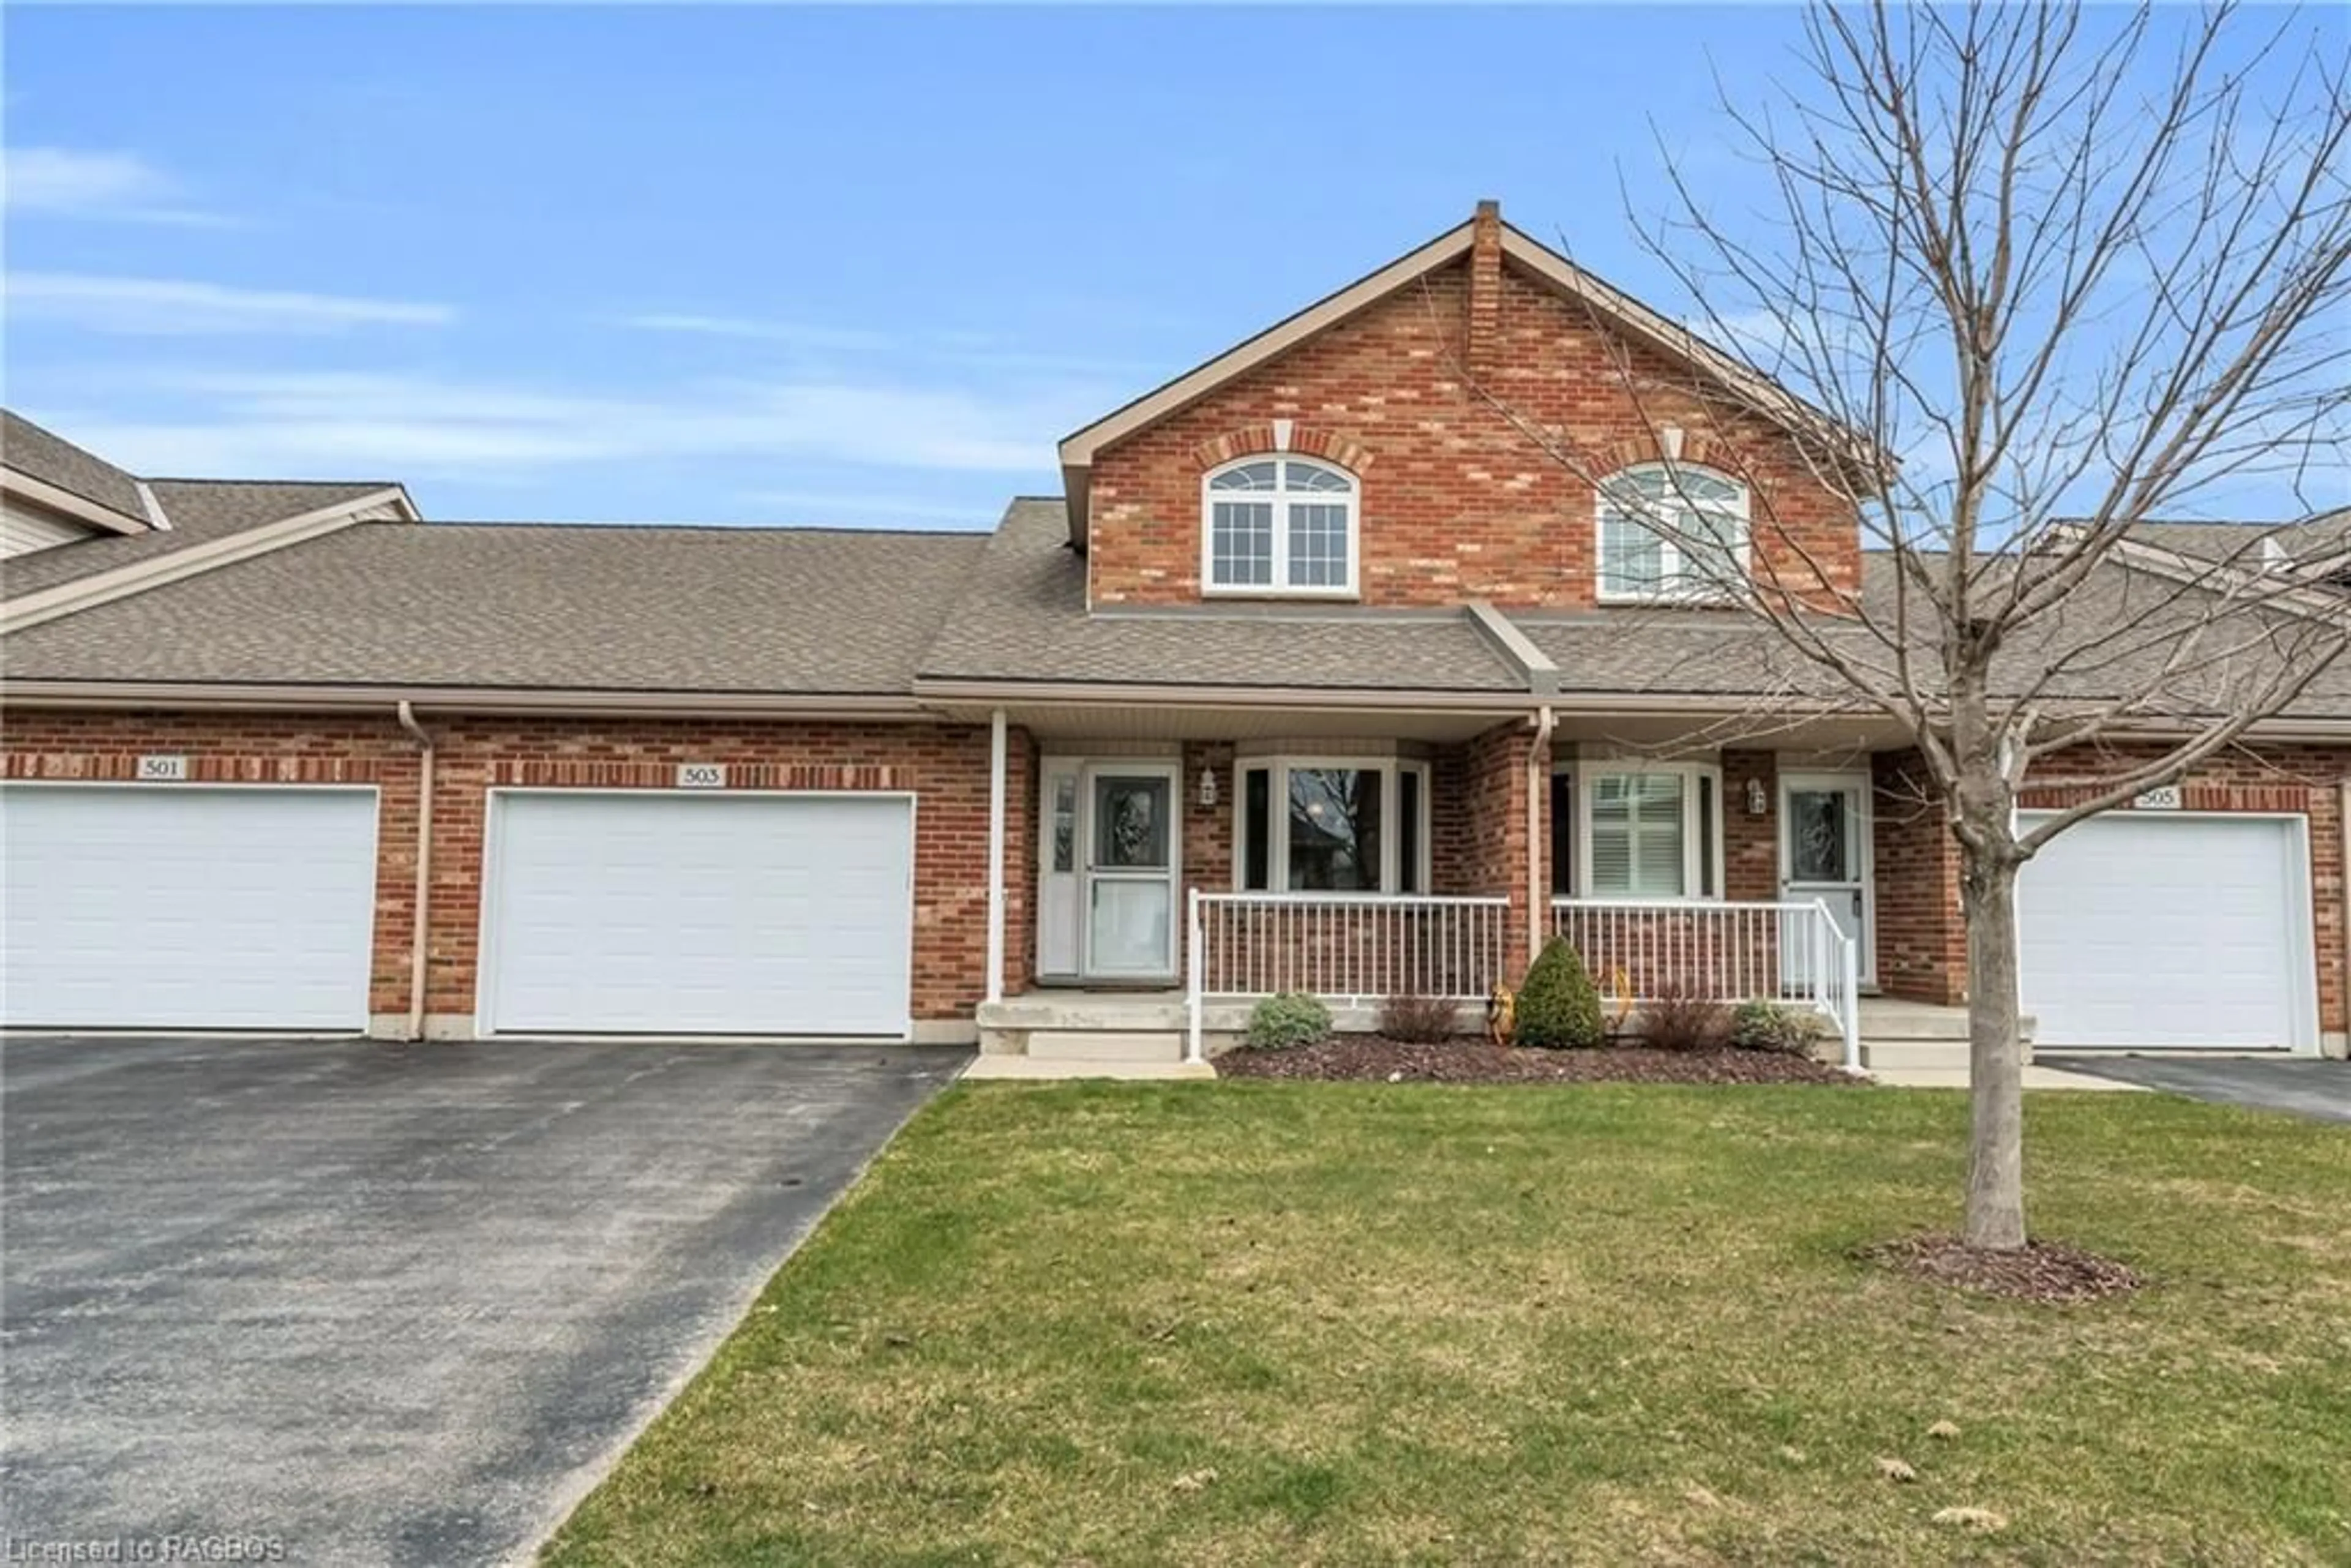 Home with brick exterior material for 503 Andrew St, Port Elgin Ontario N0H 2C1